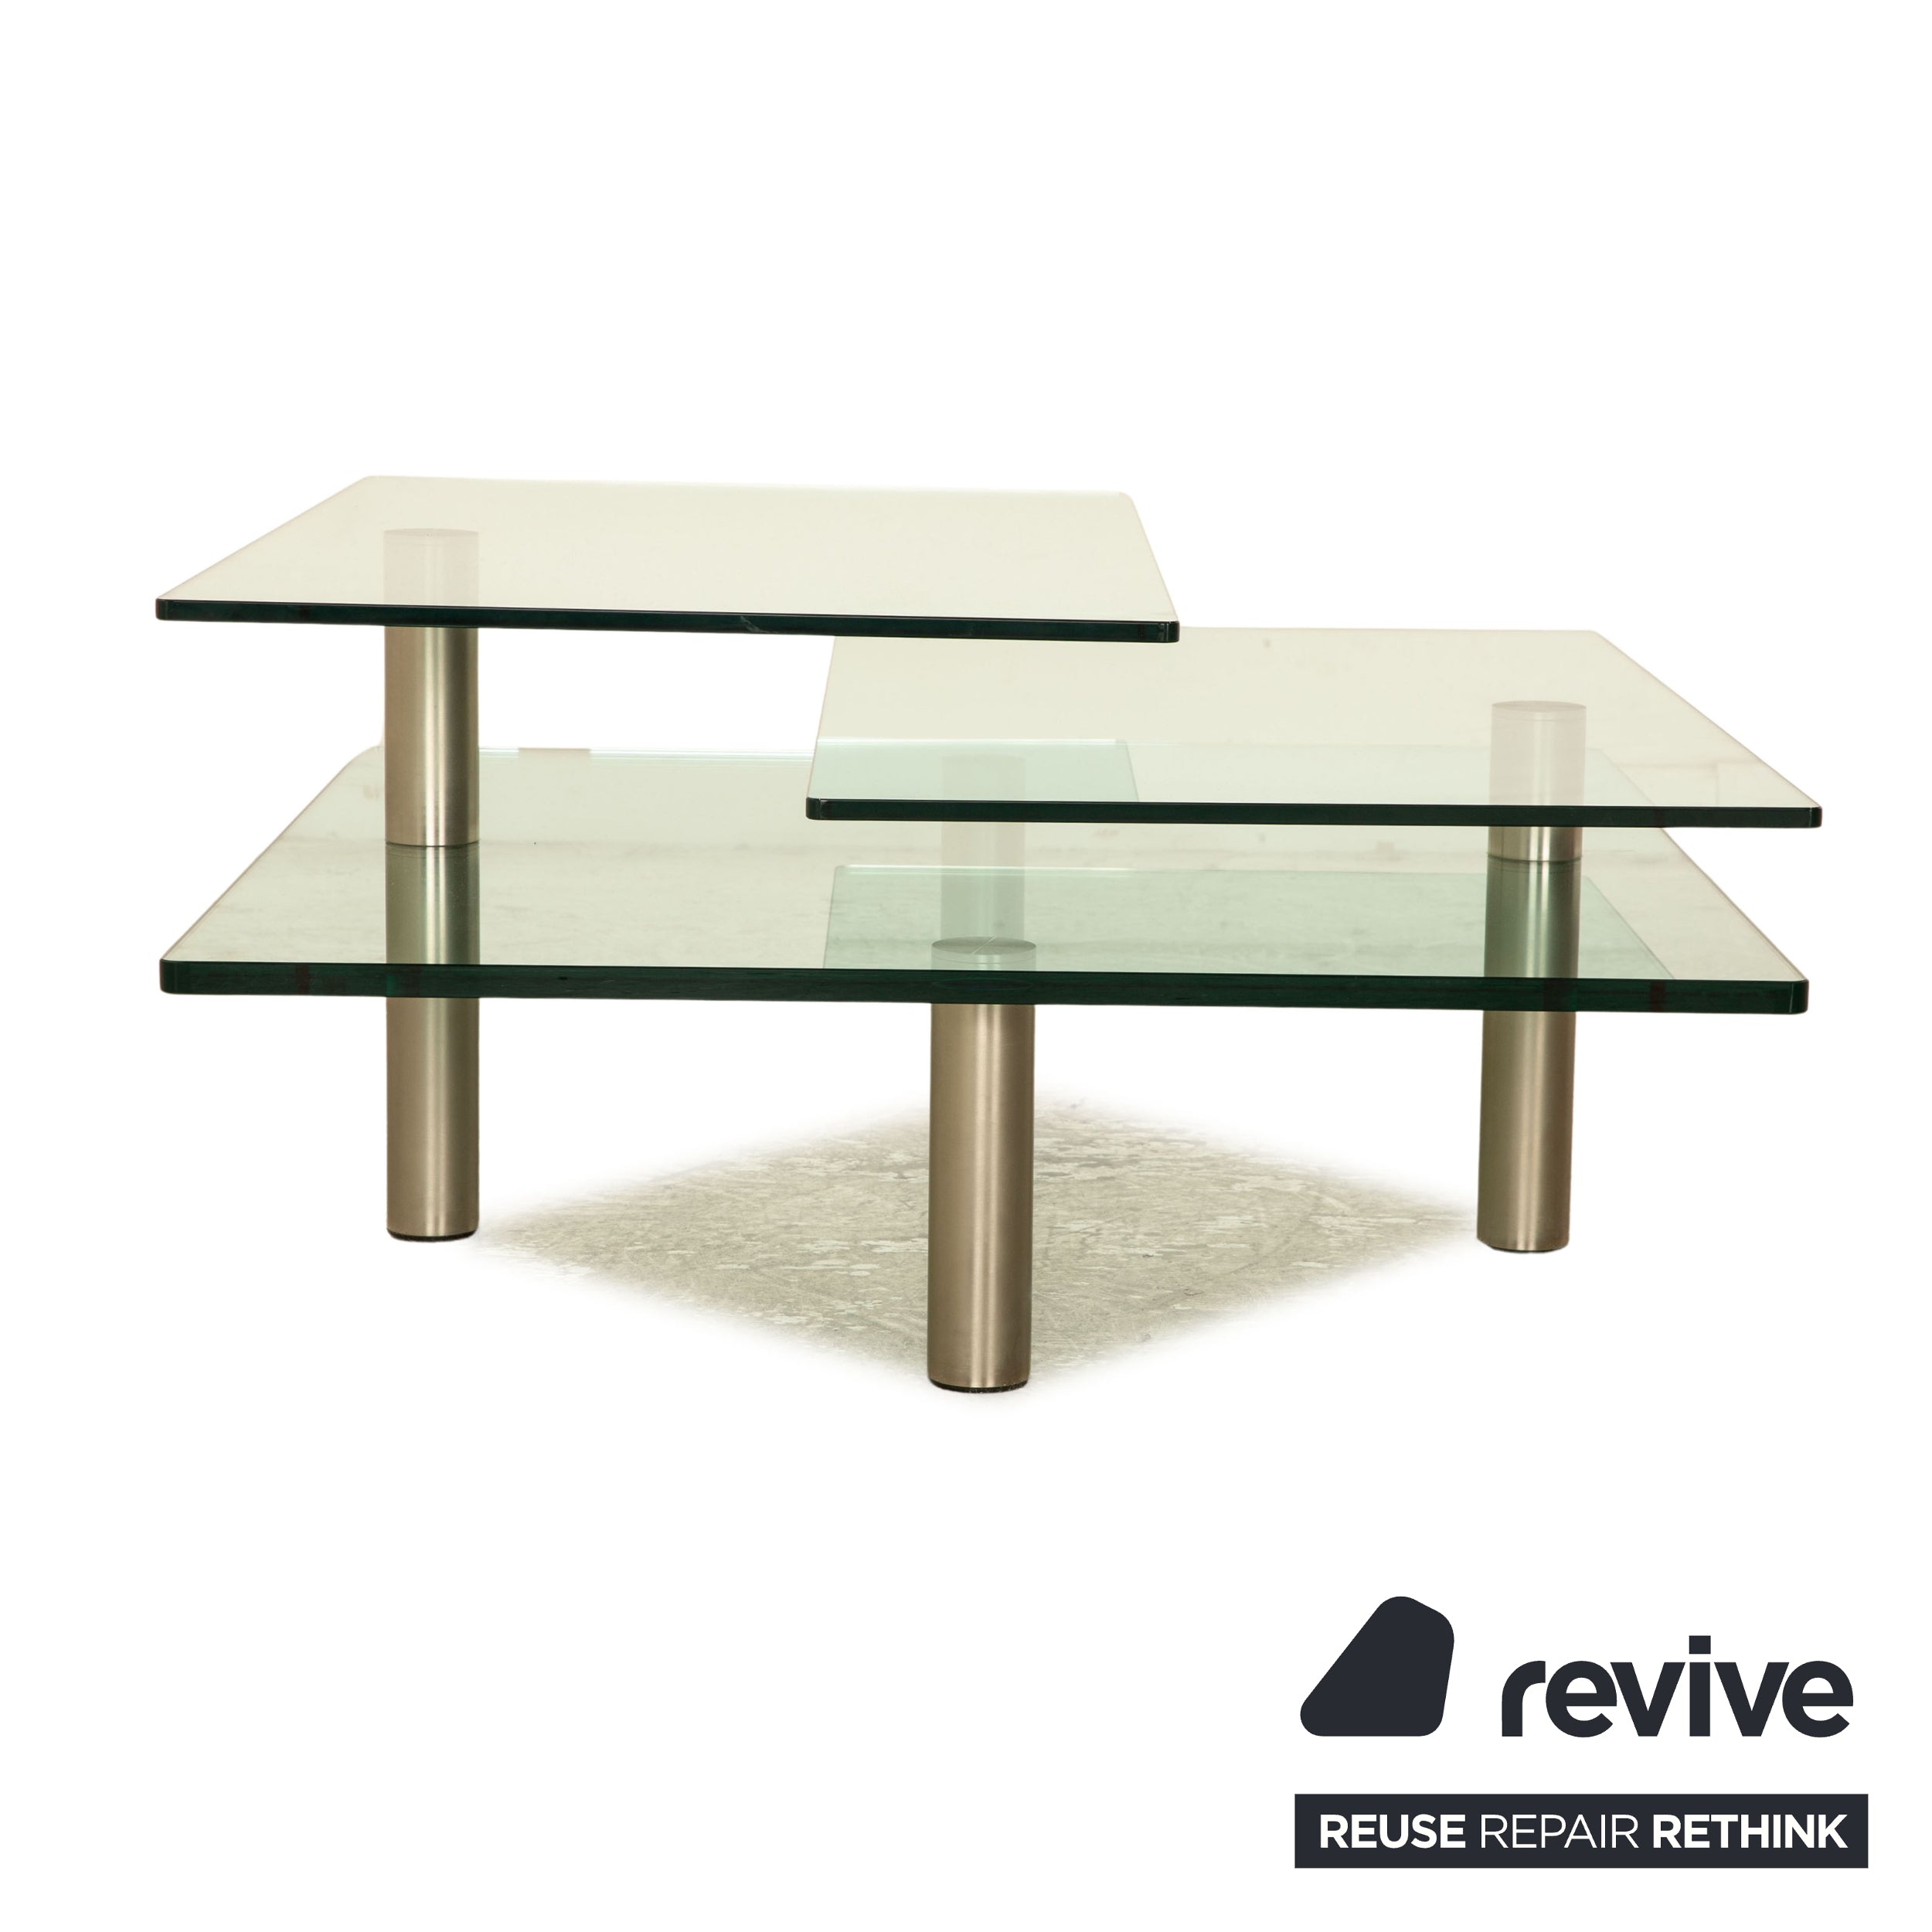 Draenert Imperial Glass Coffee Table Silver Green manual function